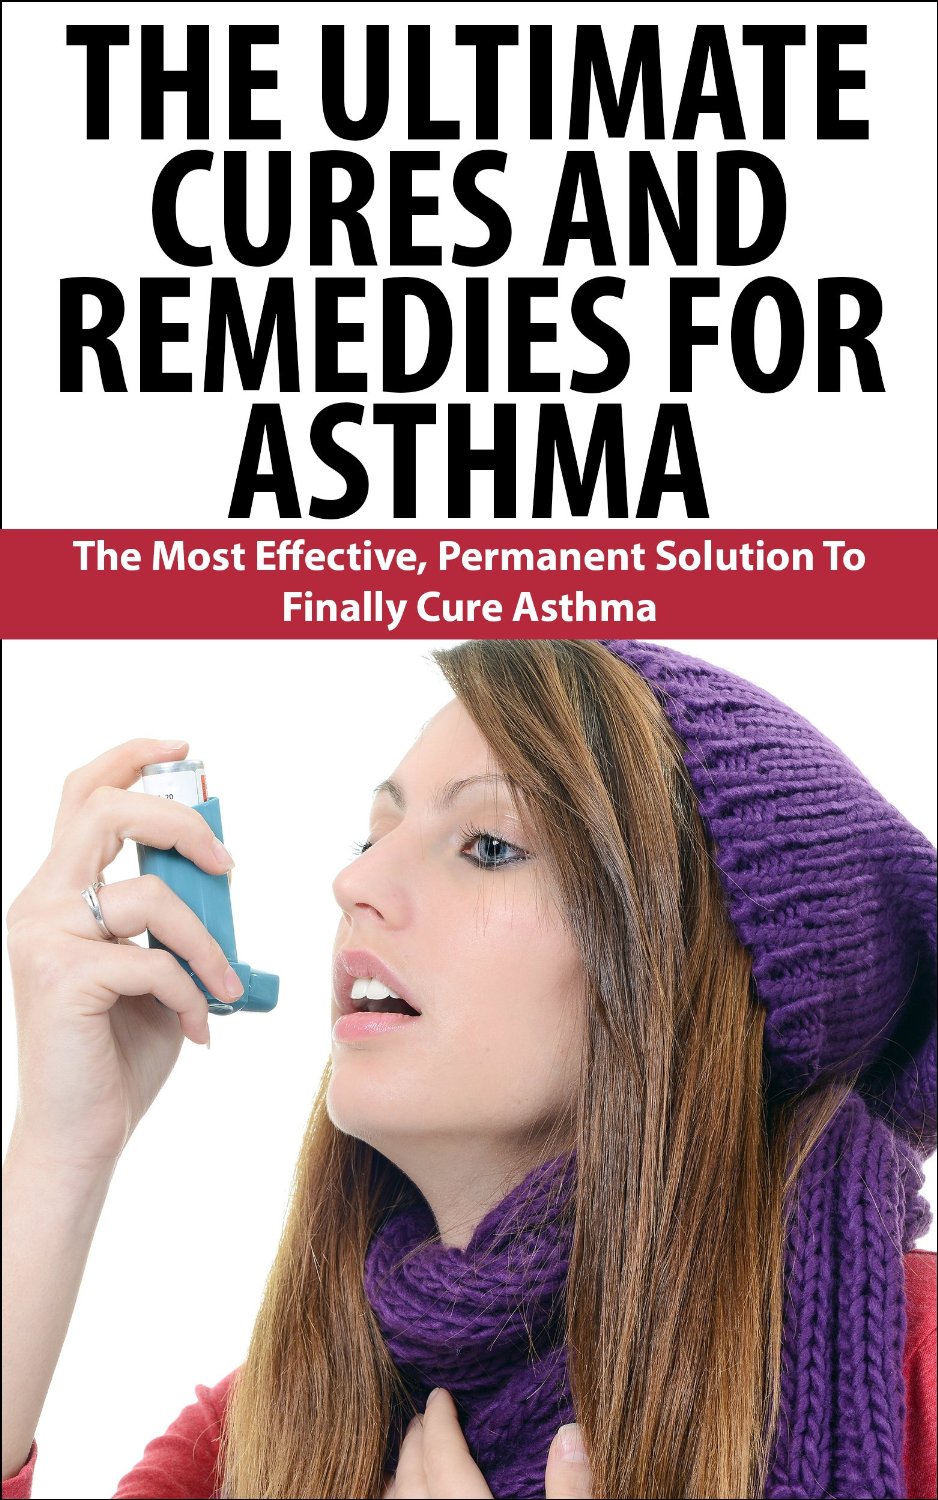 The Ultimate Cures And Remedies For Asthma: The Most Effective, Permanent Solution To Finally Cure Asthma by John K.